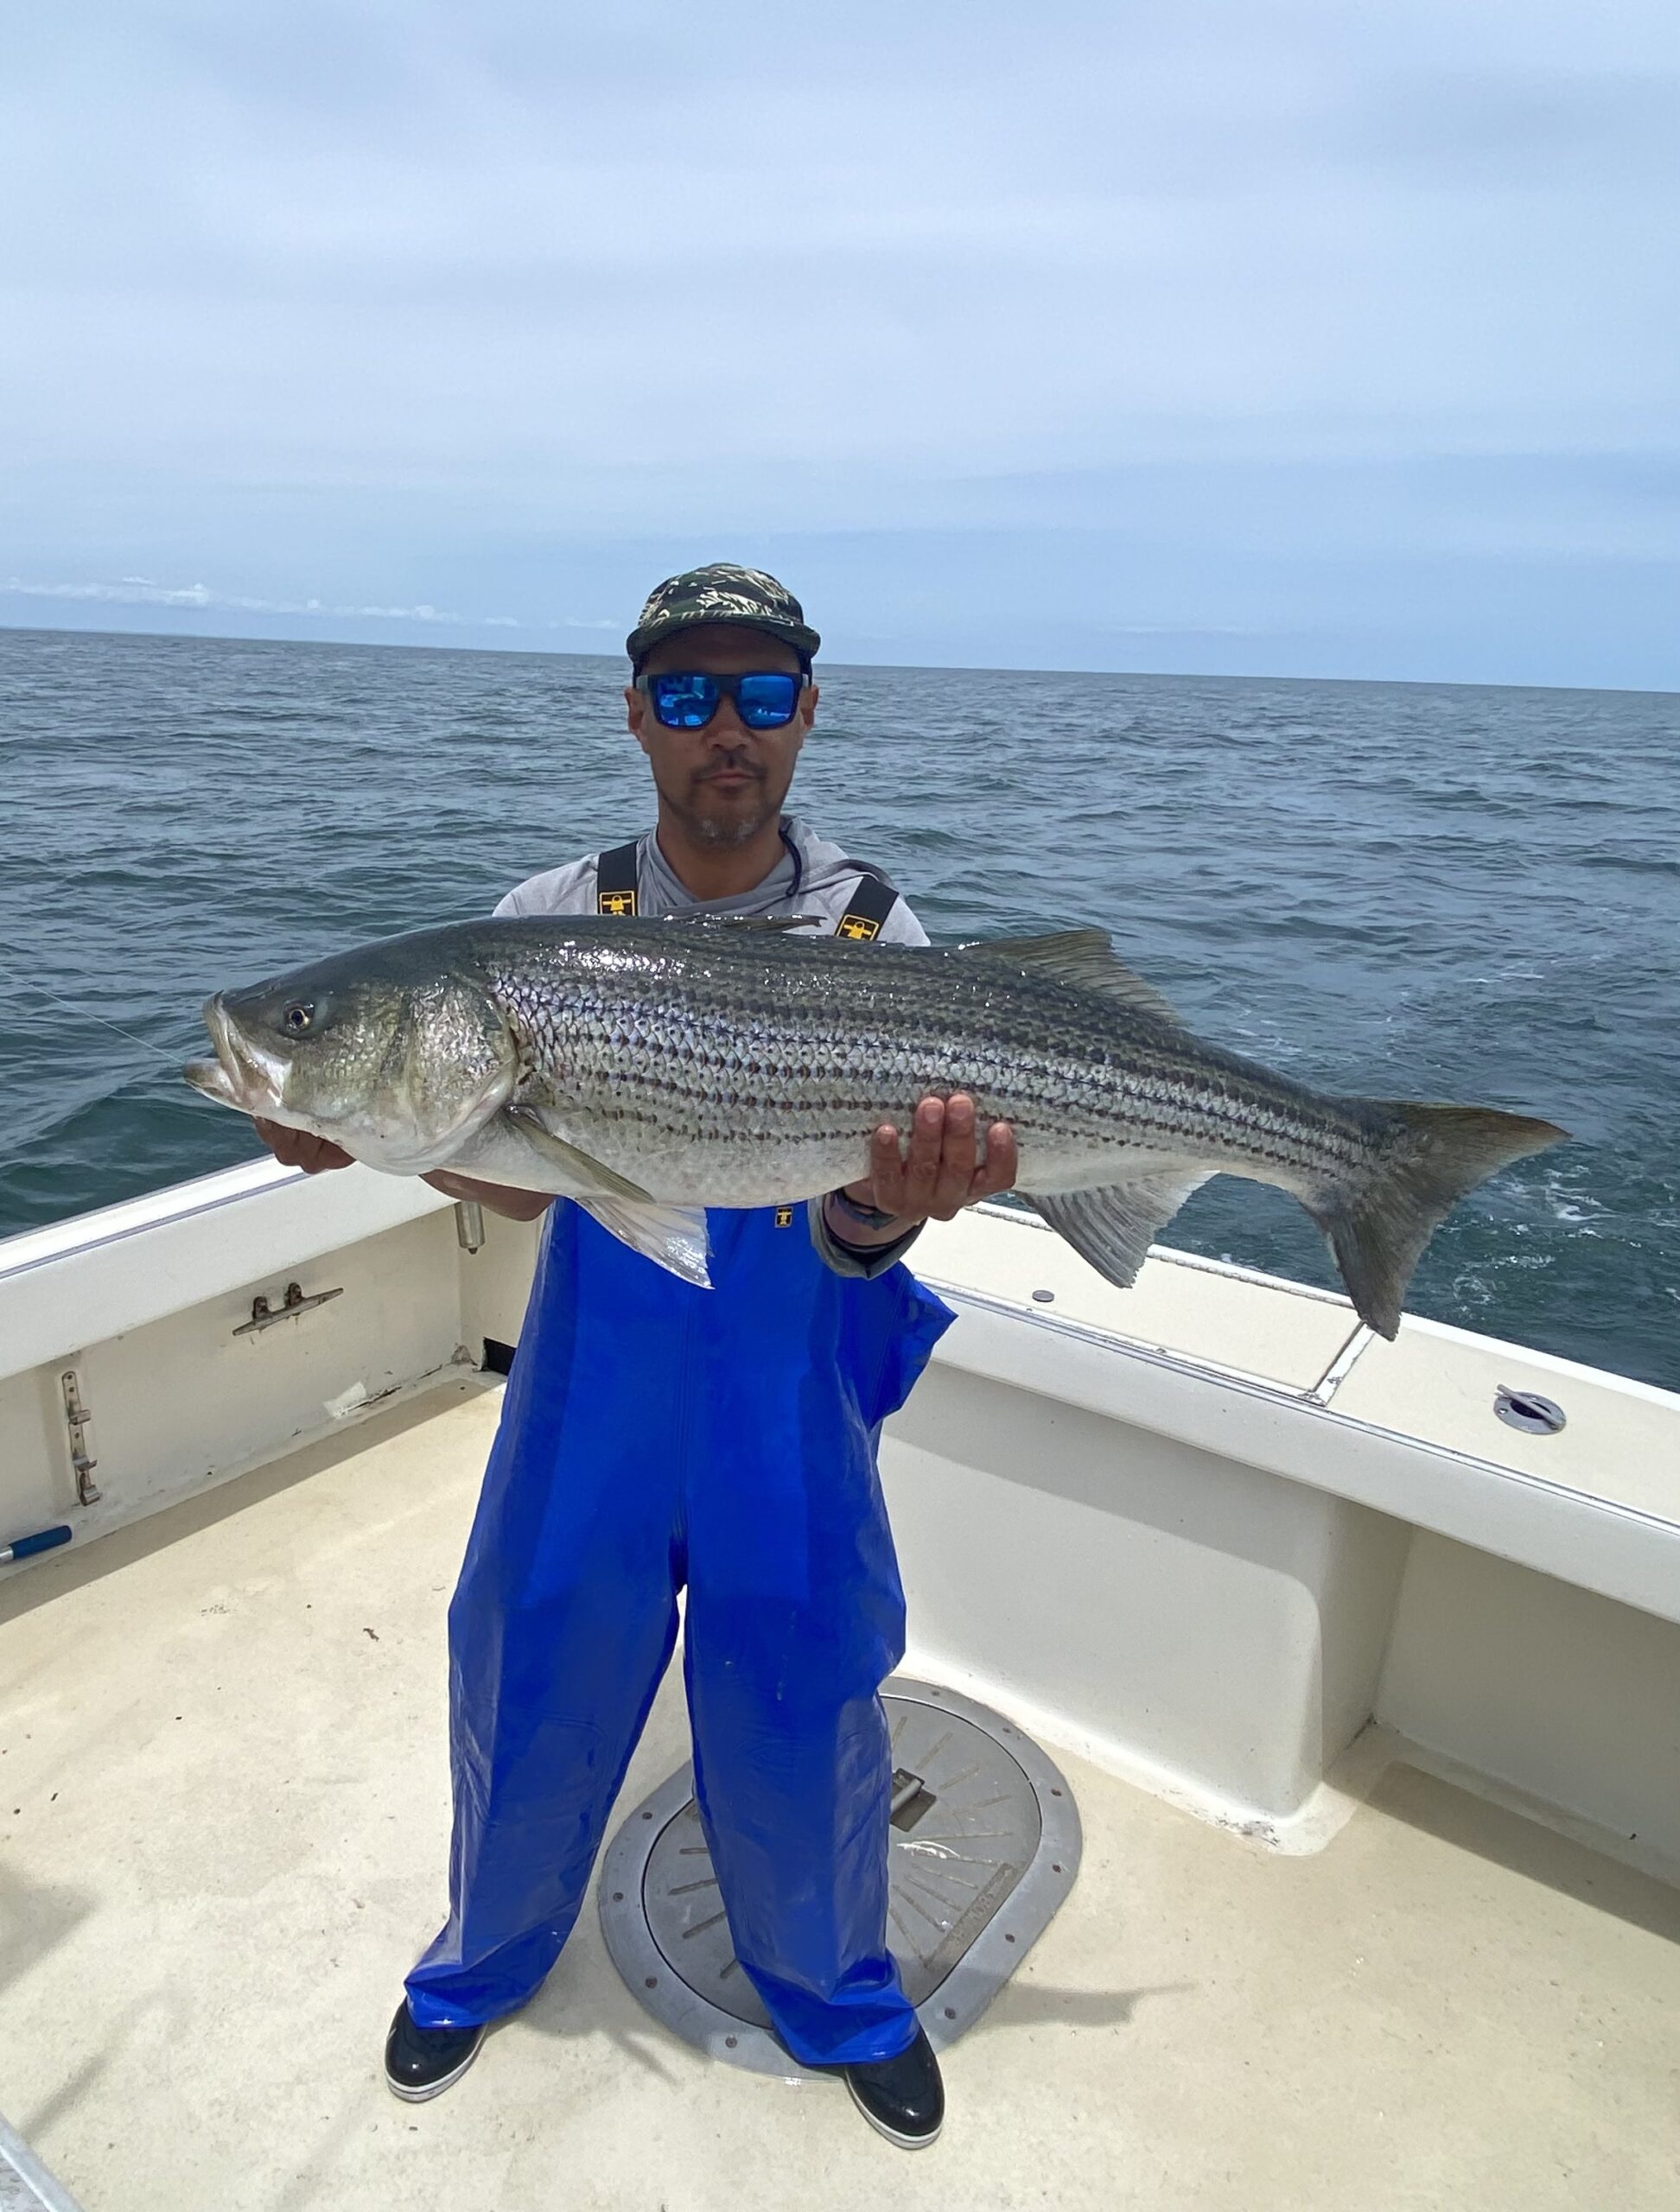 Eiji Shiga shows off a trophy Montauk striped bass before release.